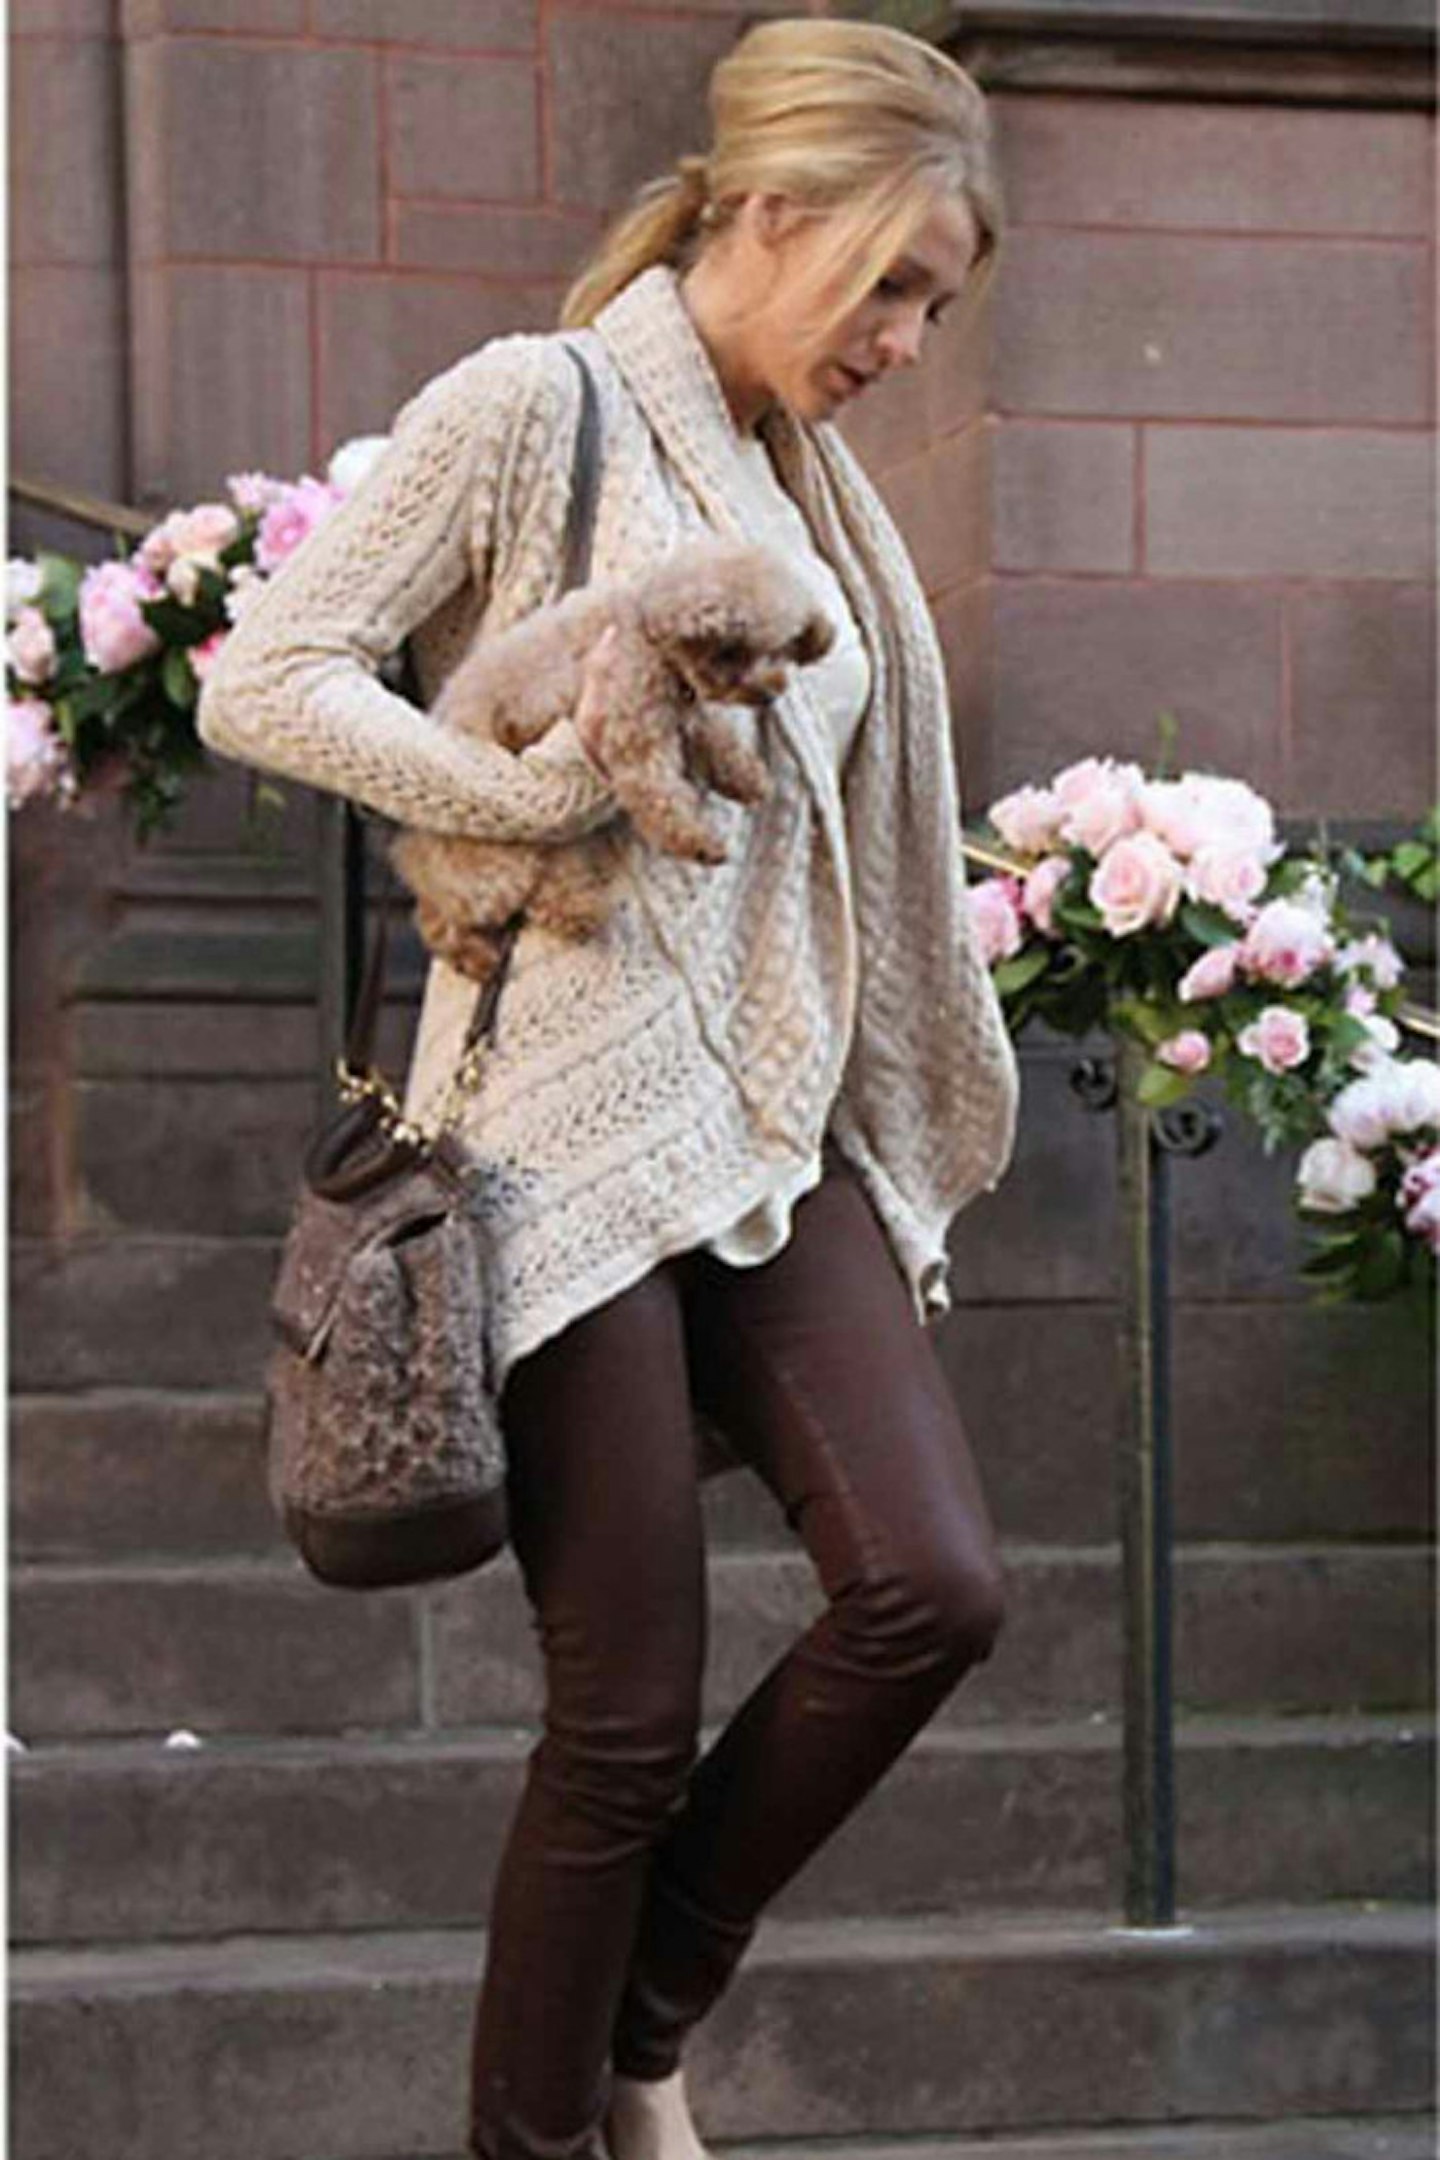 Blake Lively j brand style 2011 brown leather trousers